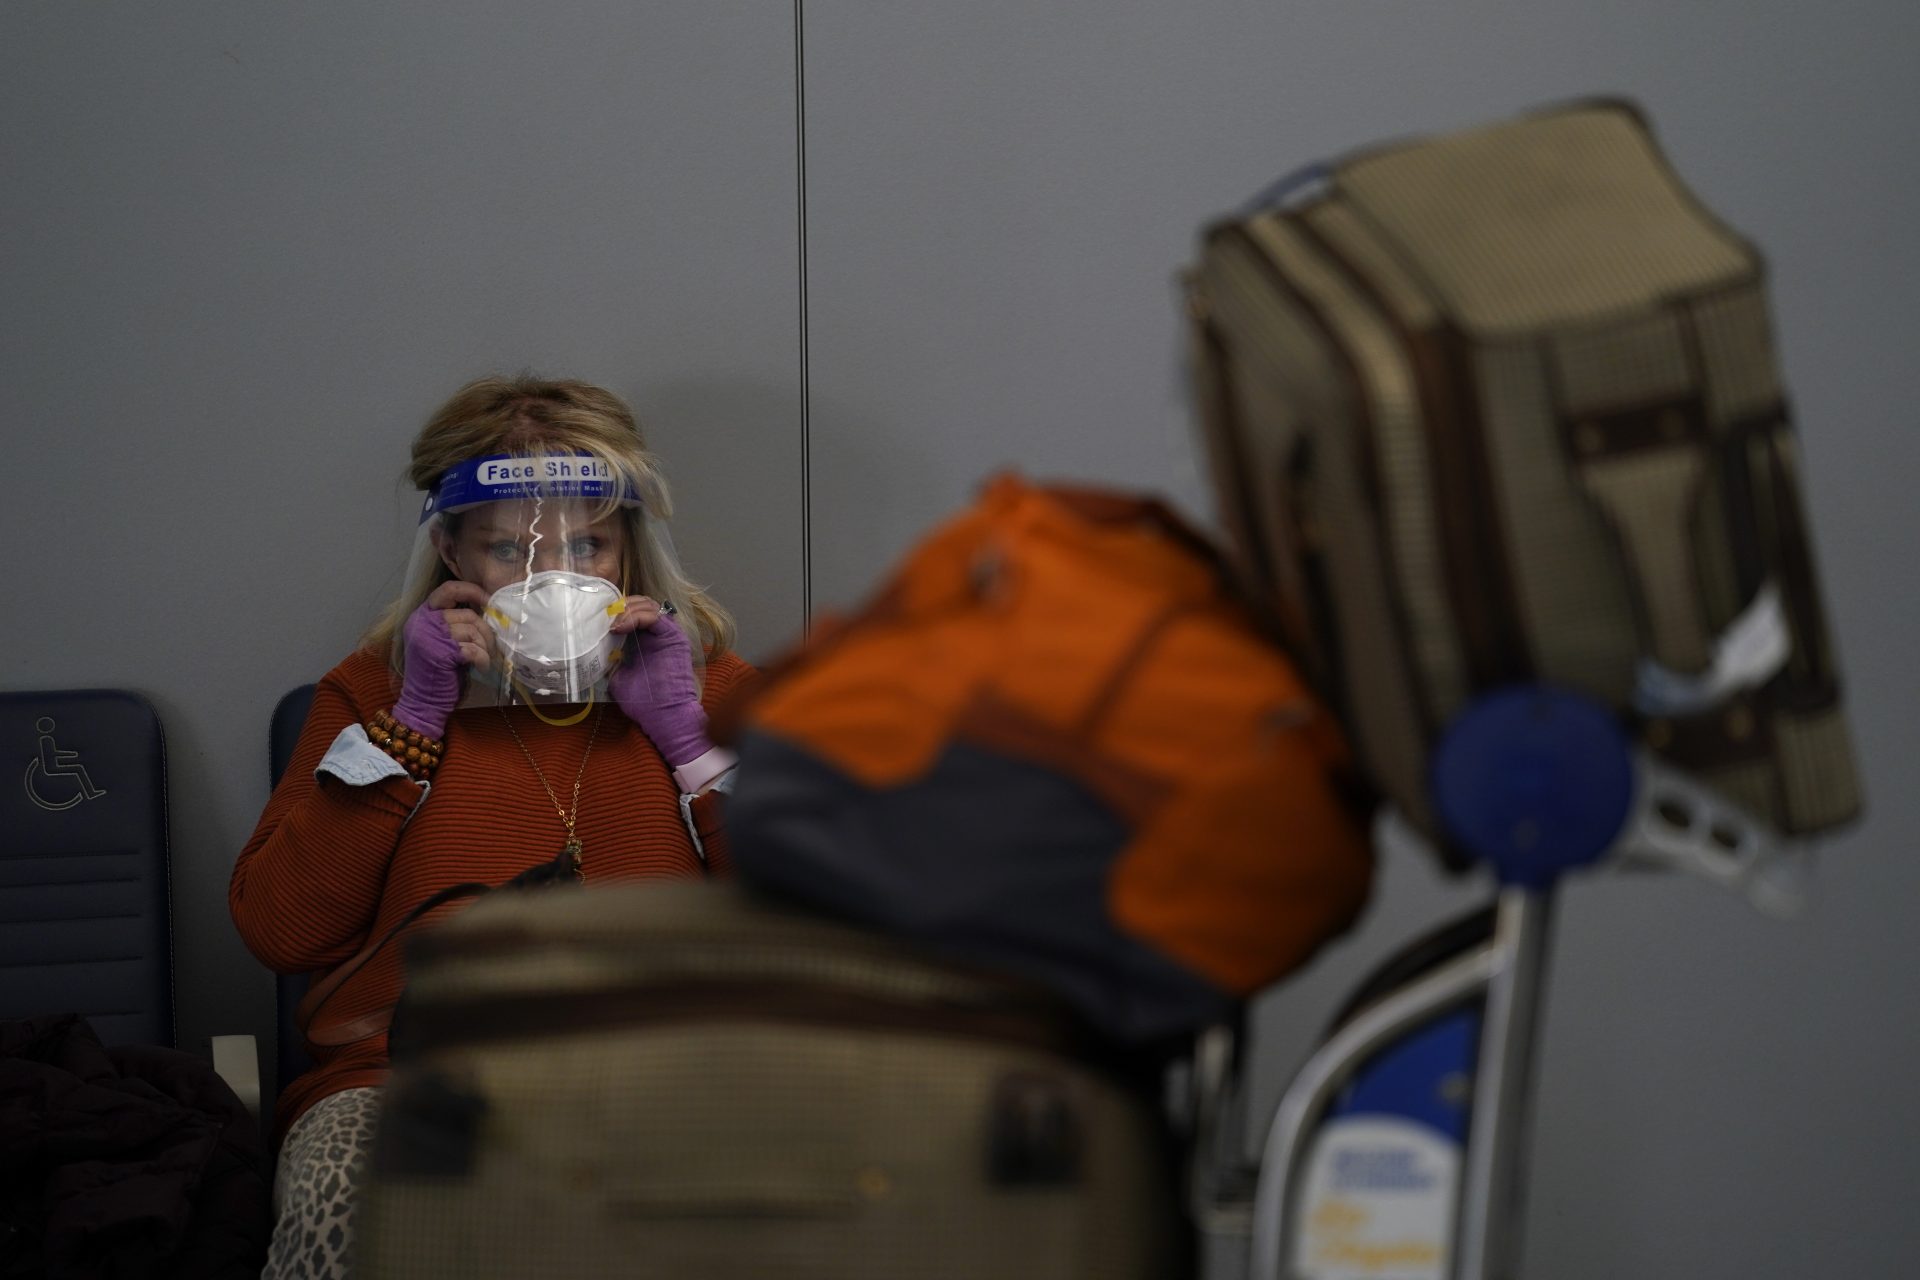 A traveler adjusts her mask while waiting to check in for her flight at the Los Angeles International Airport in Los Angeles, Monday, Nov. 23, 2020. About 1 million Americans a day packed airports and planes over the weekend even as coronavirus deaths surged across the U.S. and public health experts begged people to stay home and avoid big Thanksgiving gatherings.